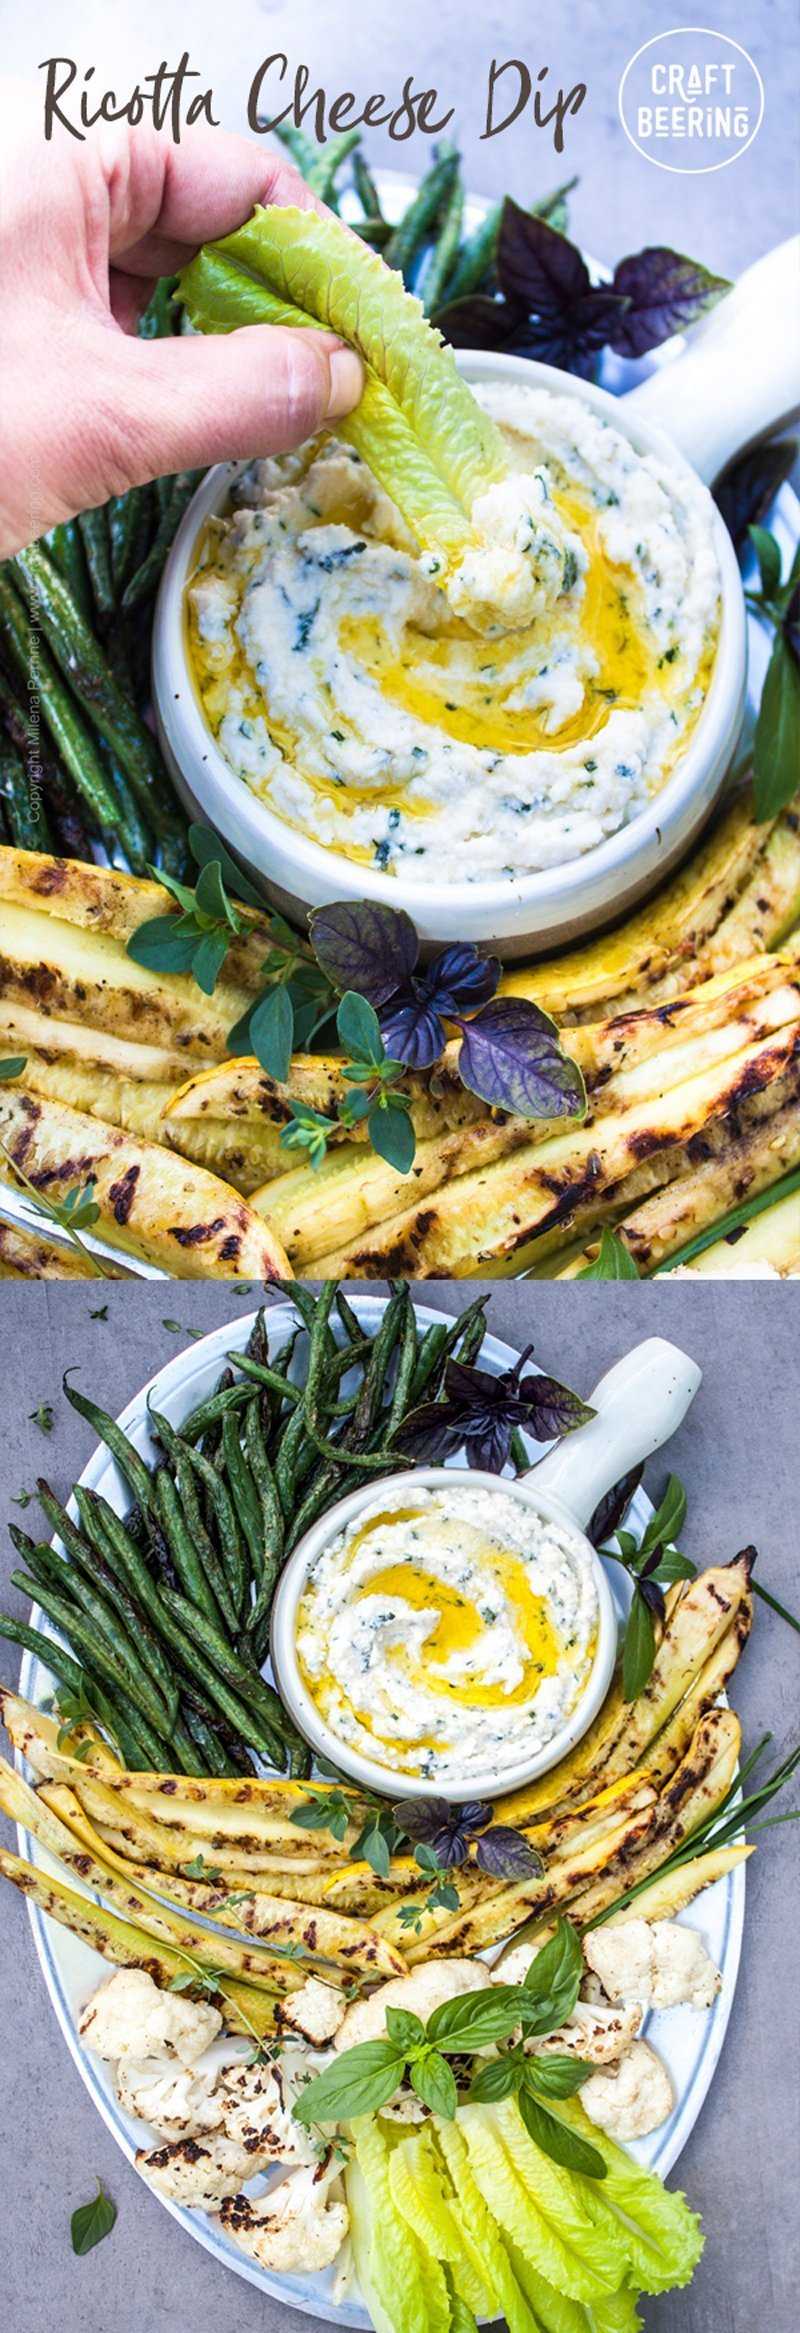 Ricotta dip is great for veggies.